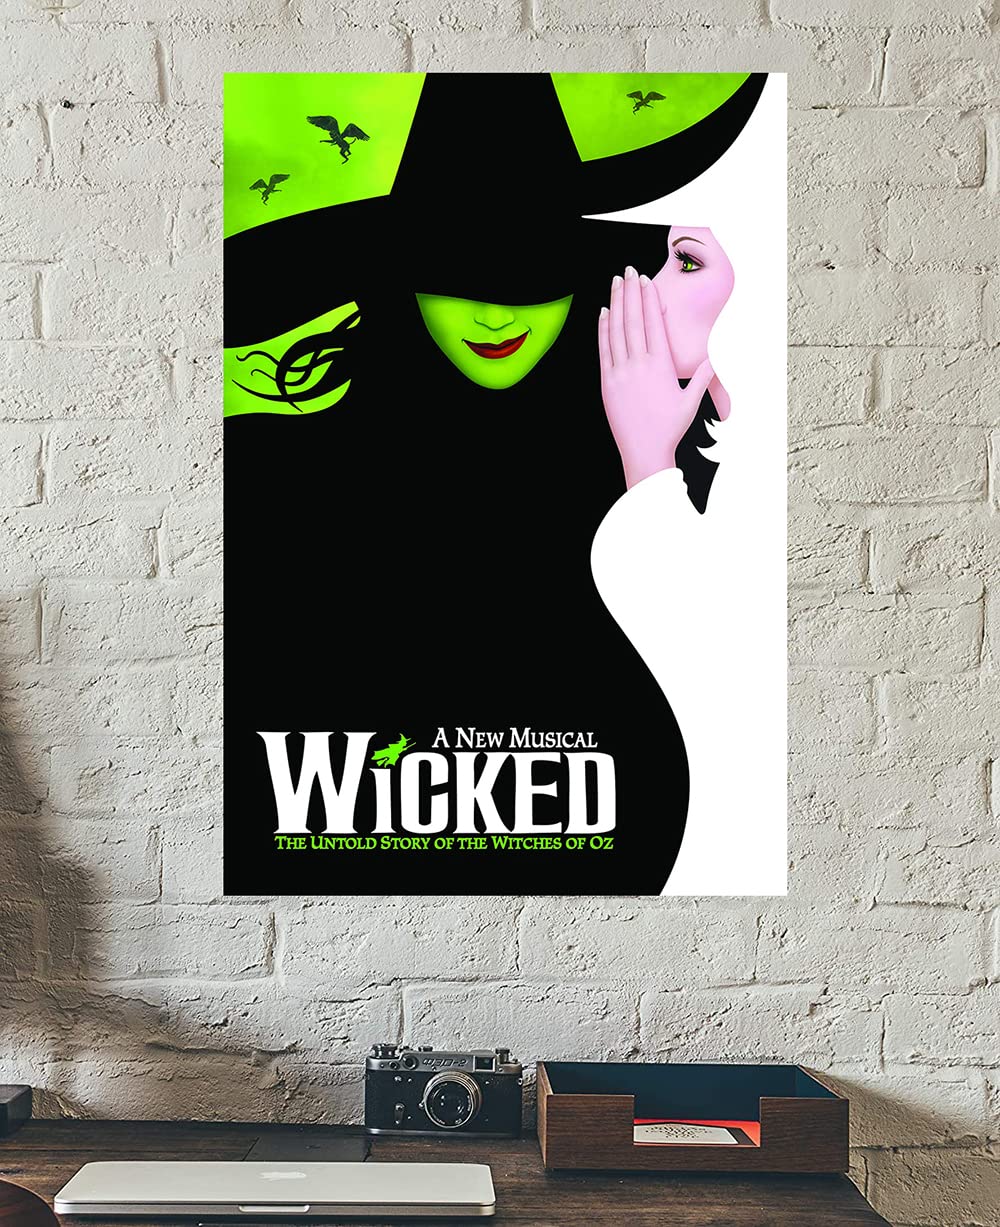 Poster Canvas Art Prints 14x20 inch for ation No Framed NEW W Wicked (Broadways)